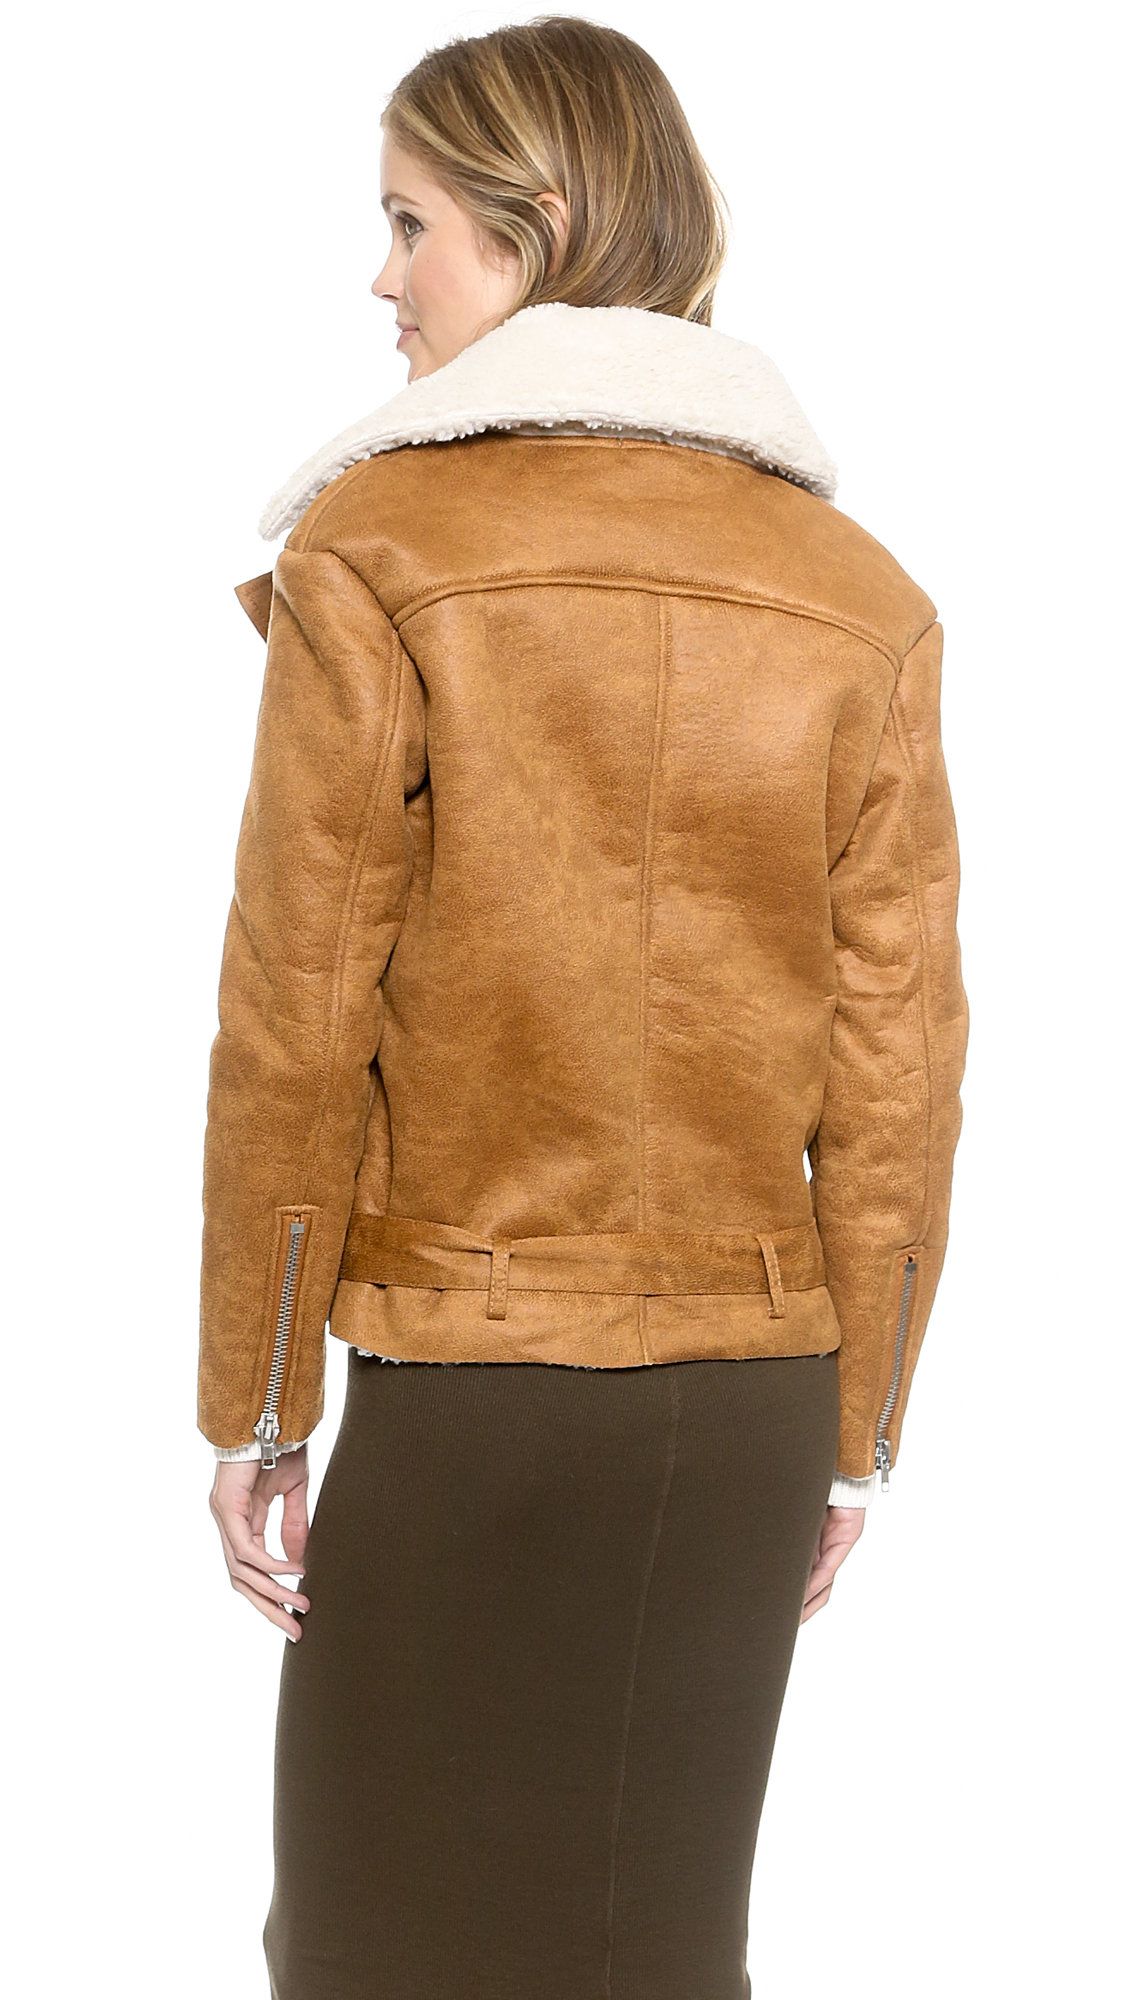 Lyst - Glamorous Faux Shearling Jacket - Brown in Brown